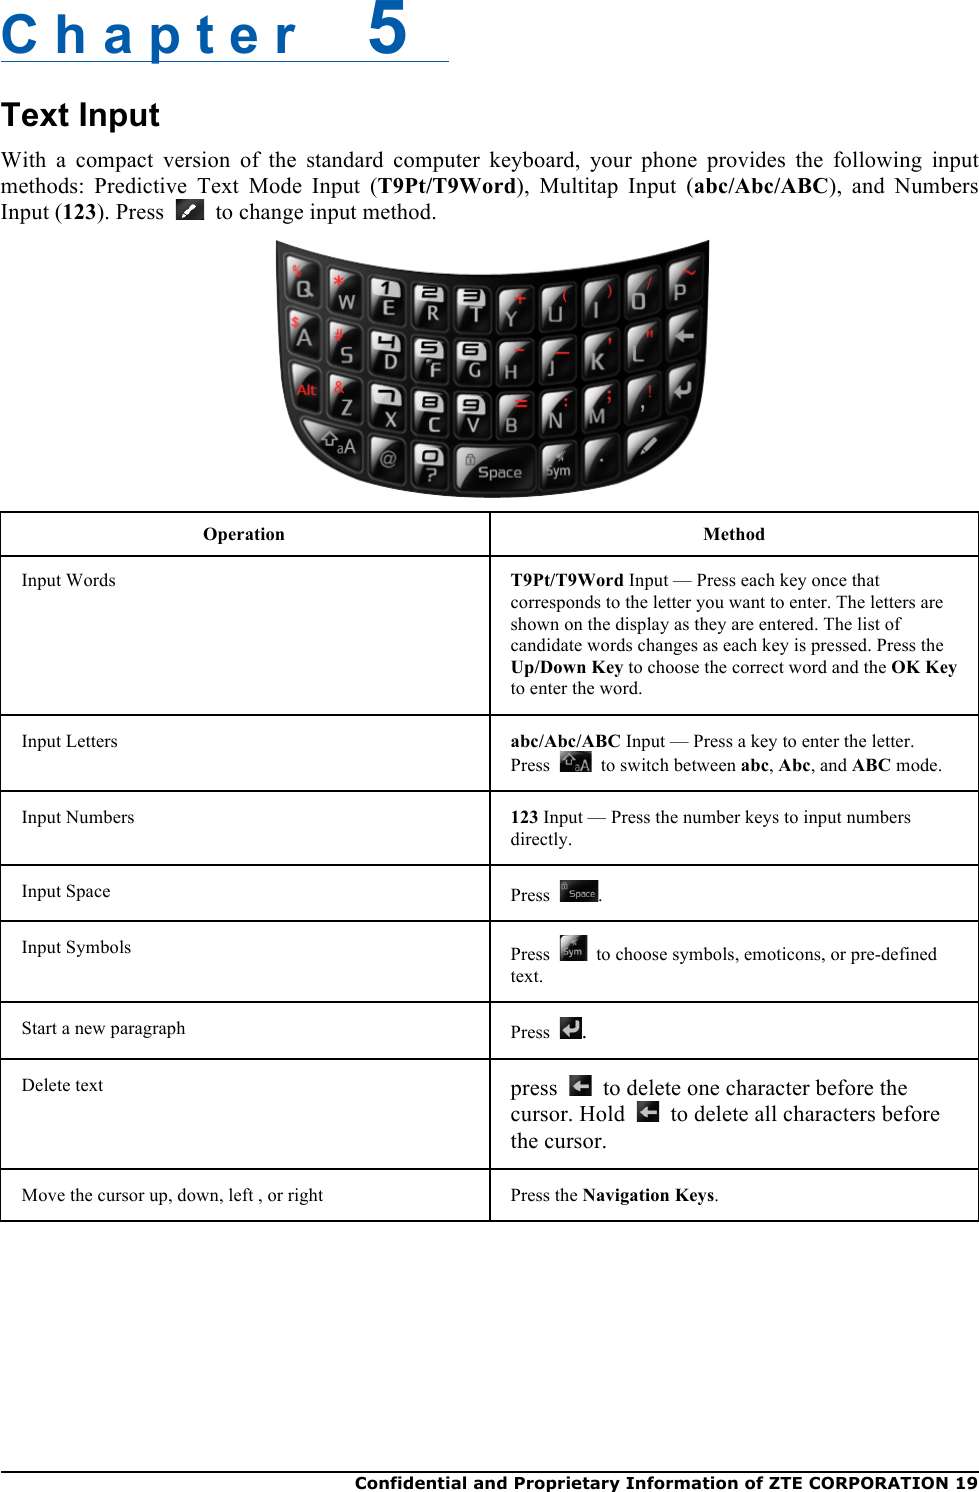 Confidential and Proprietary Information of ZTE CORPORATION 19   C h a p t e r    5   Text Input With  a  compact  version  of  the  standard  computer  keyboard,  your  phone  provides  the  following  input methods:  Predictive  Text  Mode  Input  (T9Pt/T9Word),  Multitap  Input  (abc/Abc/ABC),  and  Numbers Input (123). Press   to change input method.  Operation Method Input Words T9Pt/T9Word Input — Press each key once that corresponds to the letter you want to enter. The letters are shown on the display as they are entered. The list of candidate words changes as each key is pressed. Press the Up/Down Key to choose the correct word and the OK Key to enter the word. Input Letters abc/Abc/ABC Input — Press a key to enter the letter. Press   to switch between abc, Abc, and ABC mode. Input Numbers 123 Input — Press the number keys to input numbers directly. Input Space Press  . Input Symbols Press    to choose symbols, emoticons, or pre-defined text. Start a new paragraph Press  . Delete text press   to delete one character before the cursor. Hold   to delete all characters before the cursor. Move the cursor up, down, left , or right Press the Navigation Keys.     